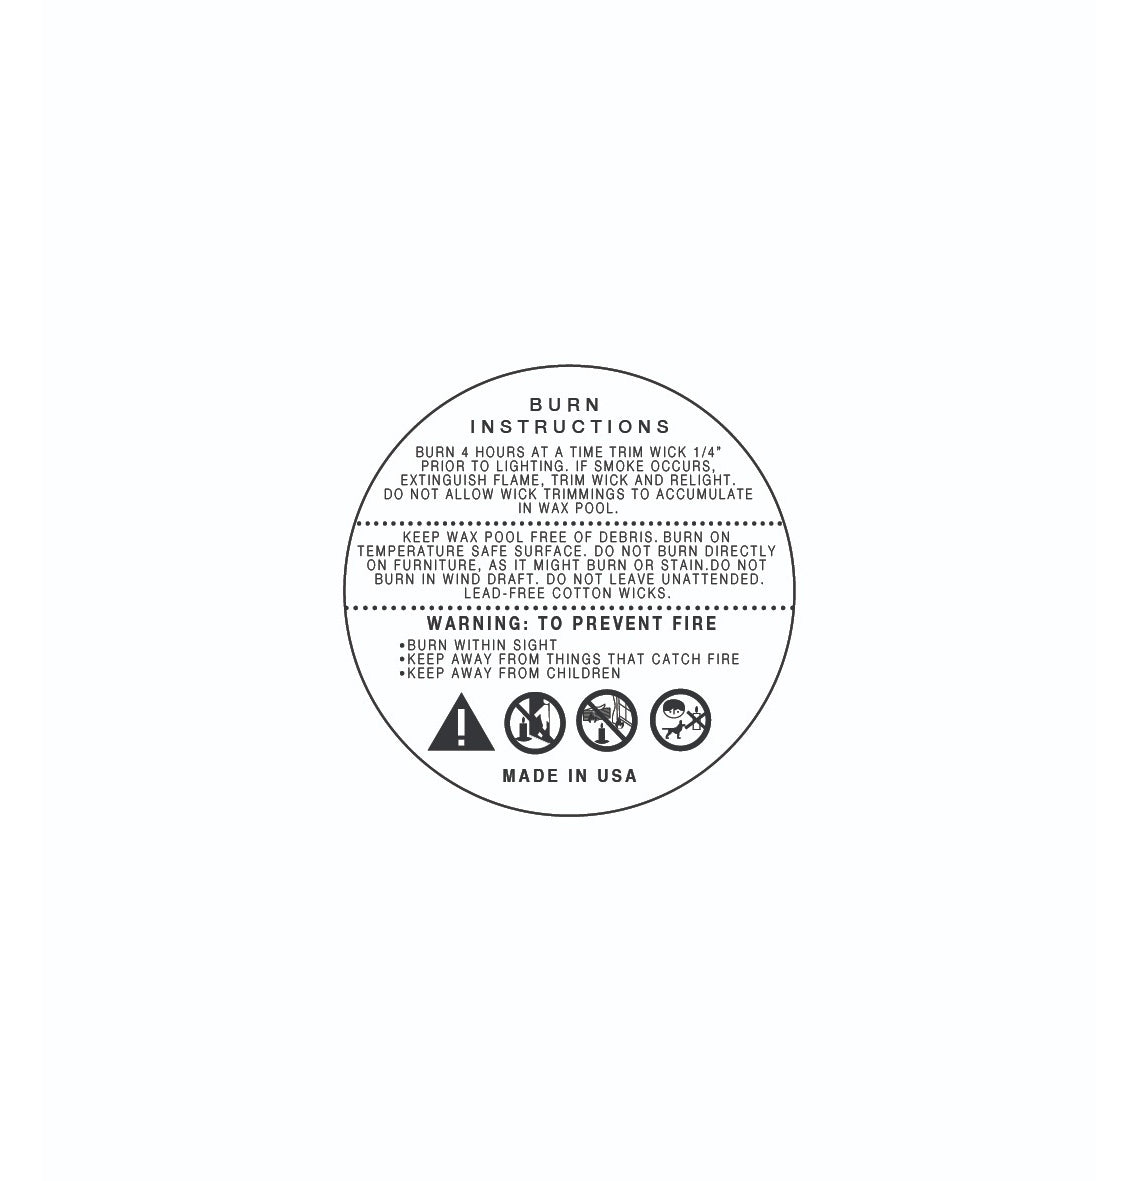 CANDLE WARNING LABEL (SMALL 1.25 X 1.25)